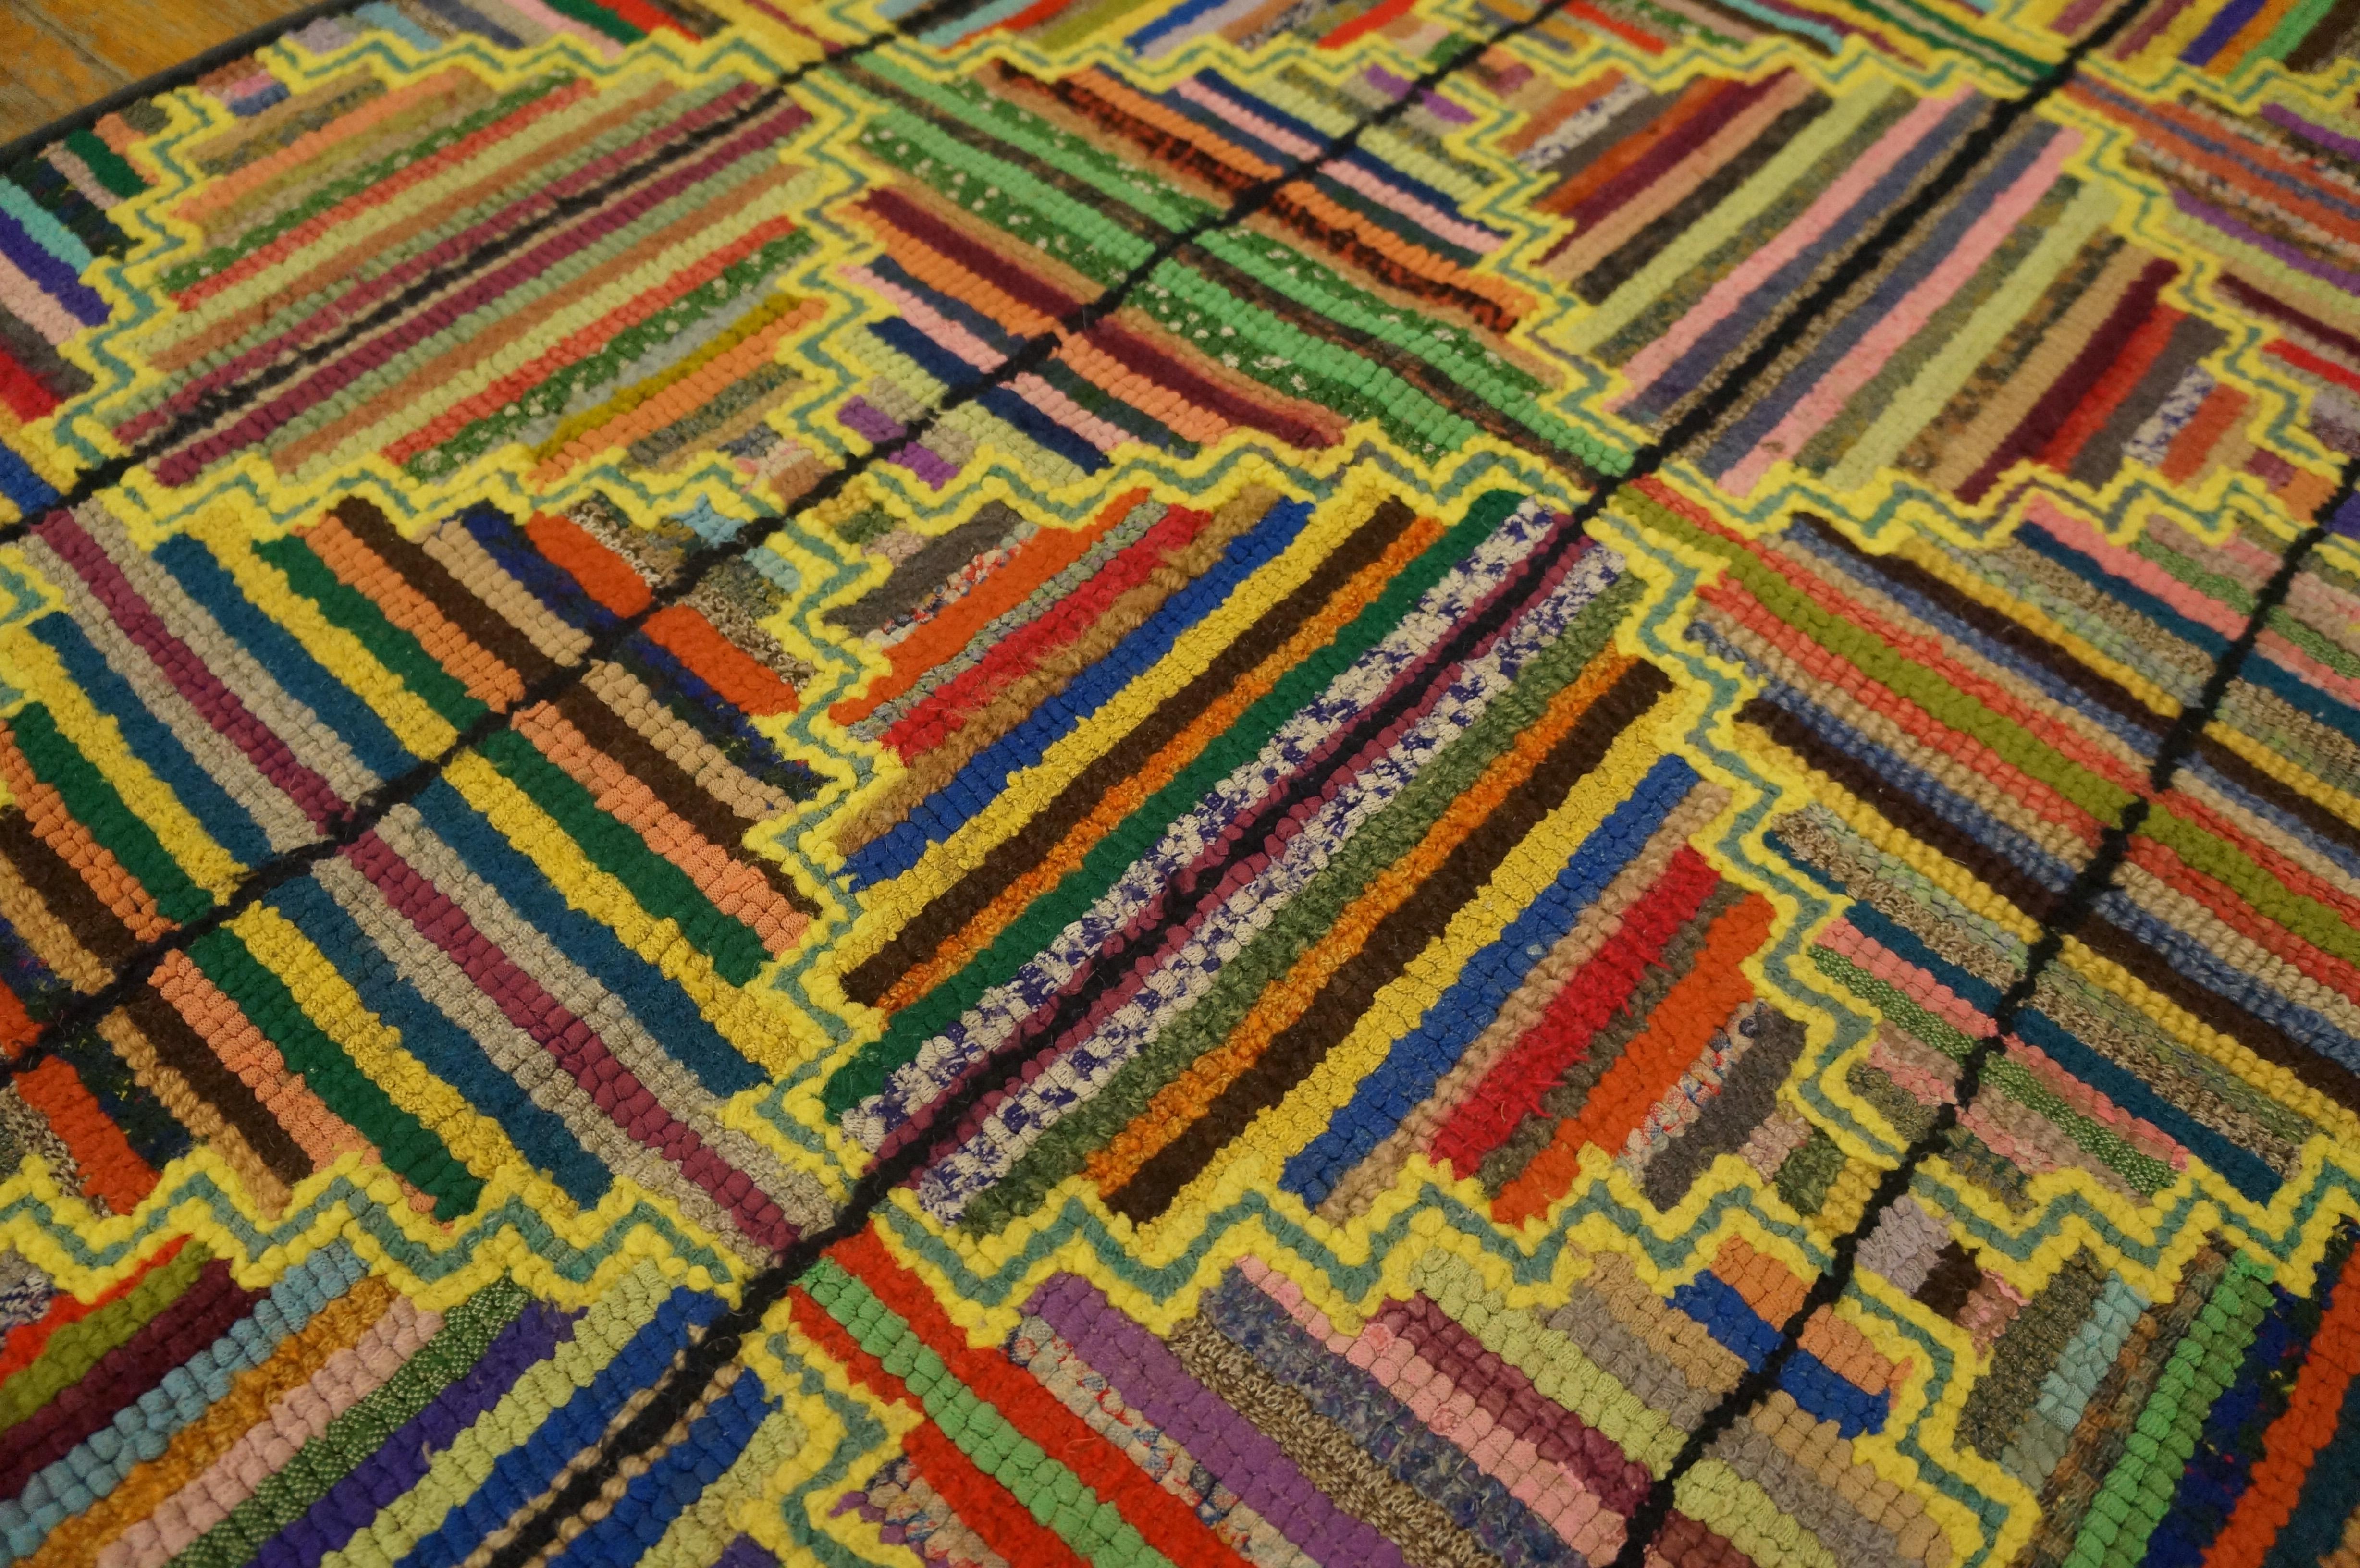 Mid-20th Century 1930s American Hooked Rug ( 2' 3'' x 3' 5'' - 68 x 104 cm) For Sale